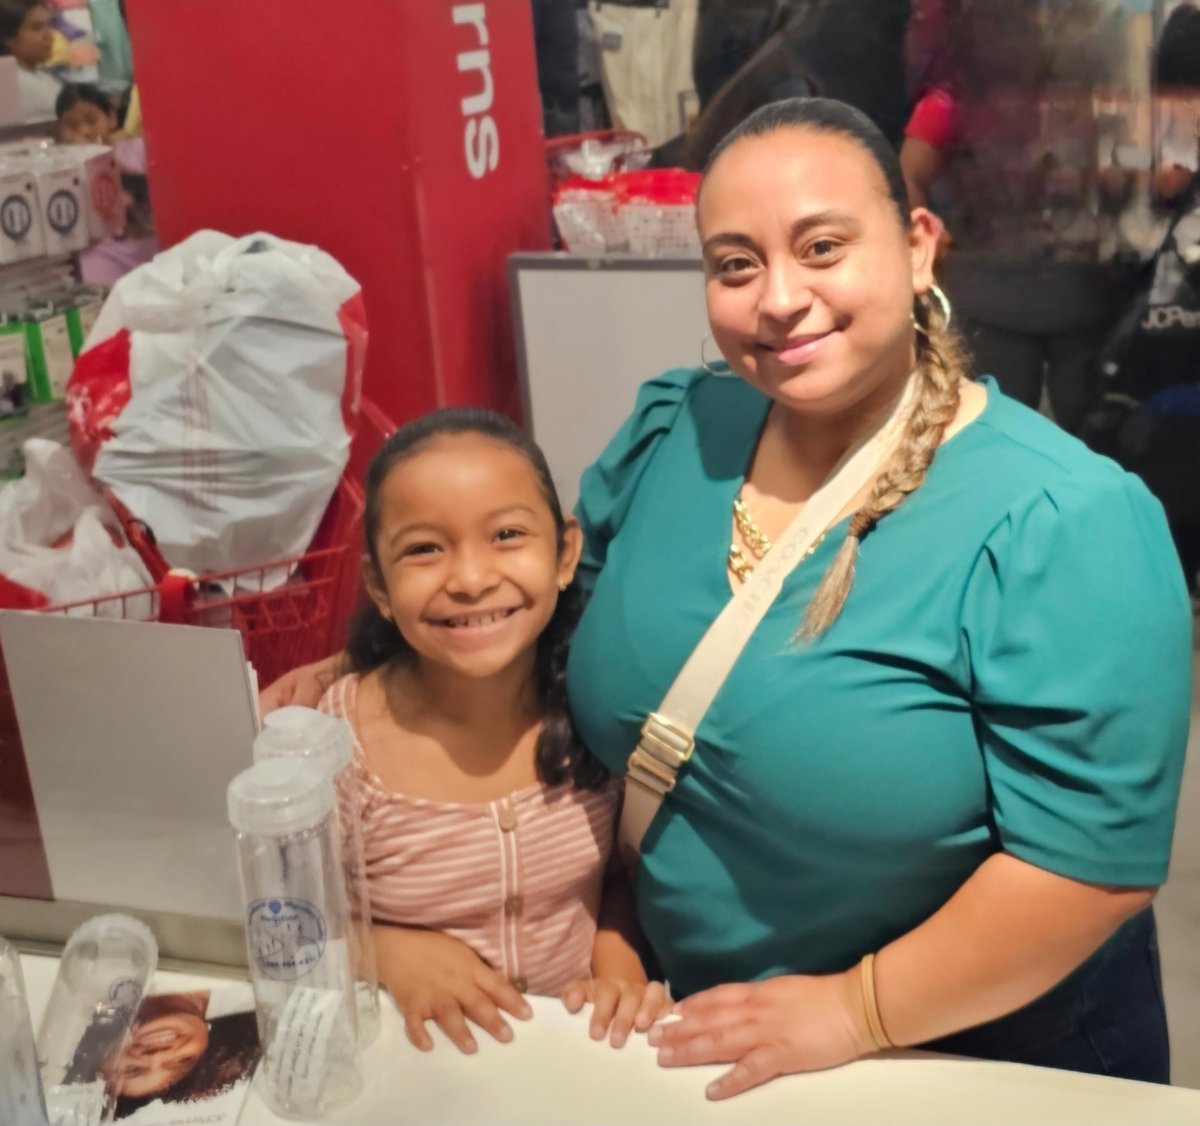 Our Migrant Education Program is spreading joy and support by providing brand new clothes to the students it serves. As we gear up for end-of-year festivities like graduations and award ceremonies, this gesture couldn't come at a better time. Learn More: ow.ly/Heey50RQVJ1